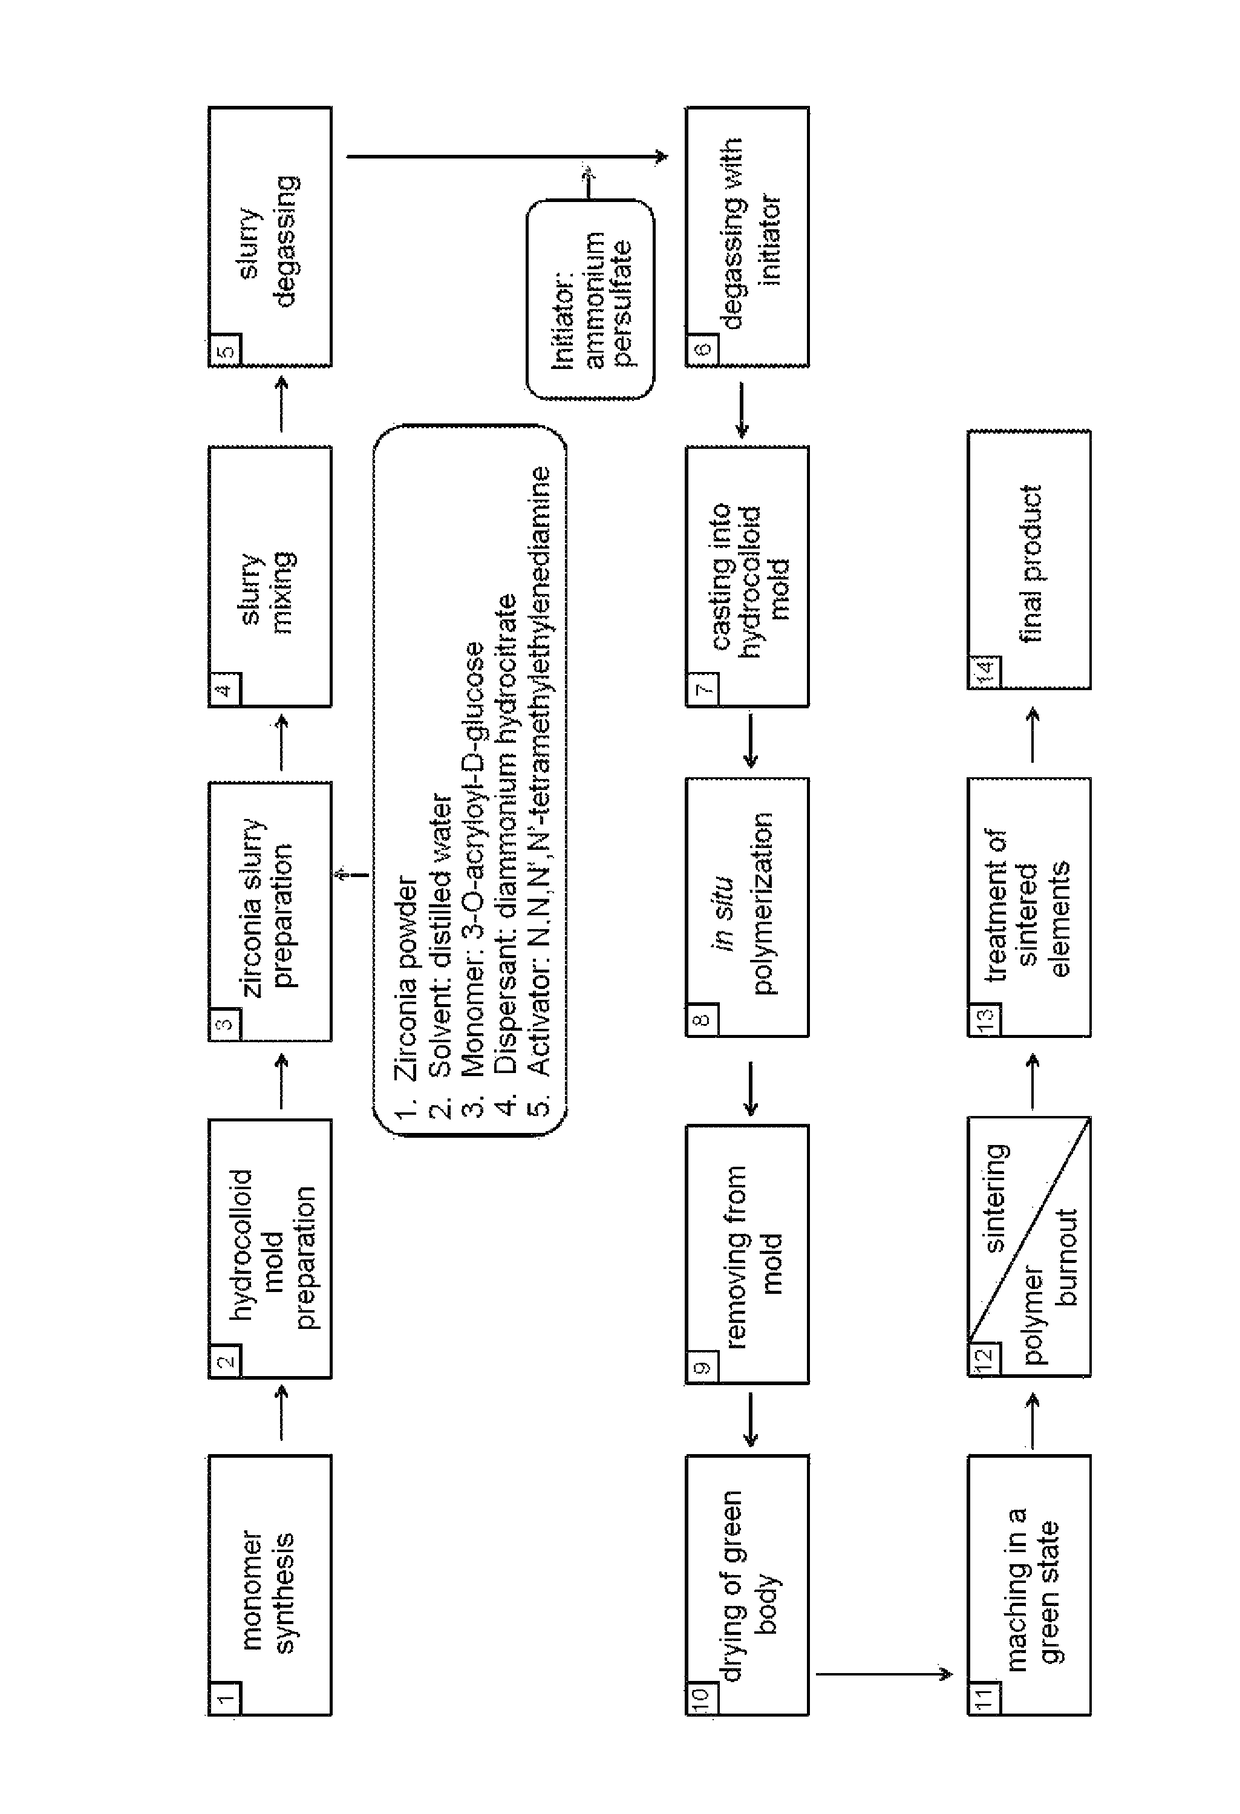 Process for the fabrication of dental restorations